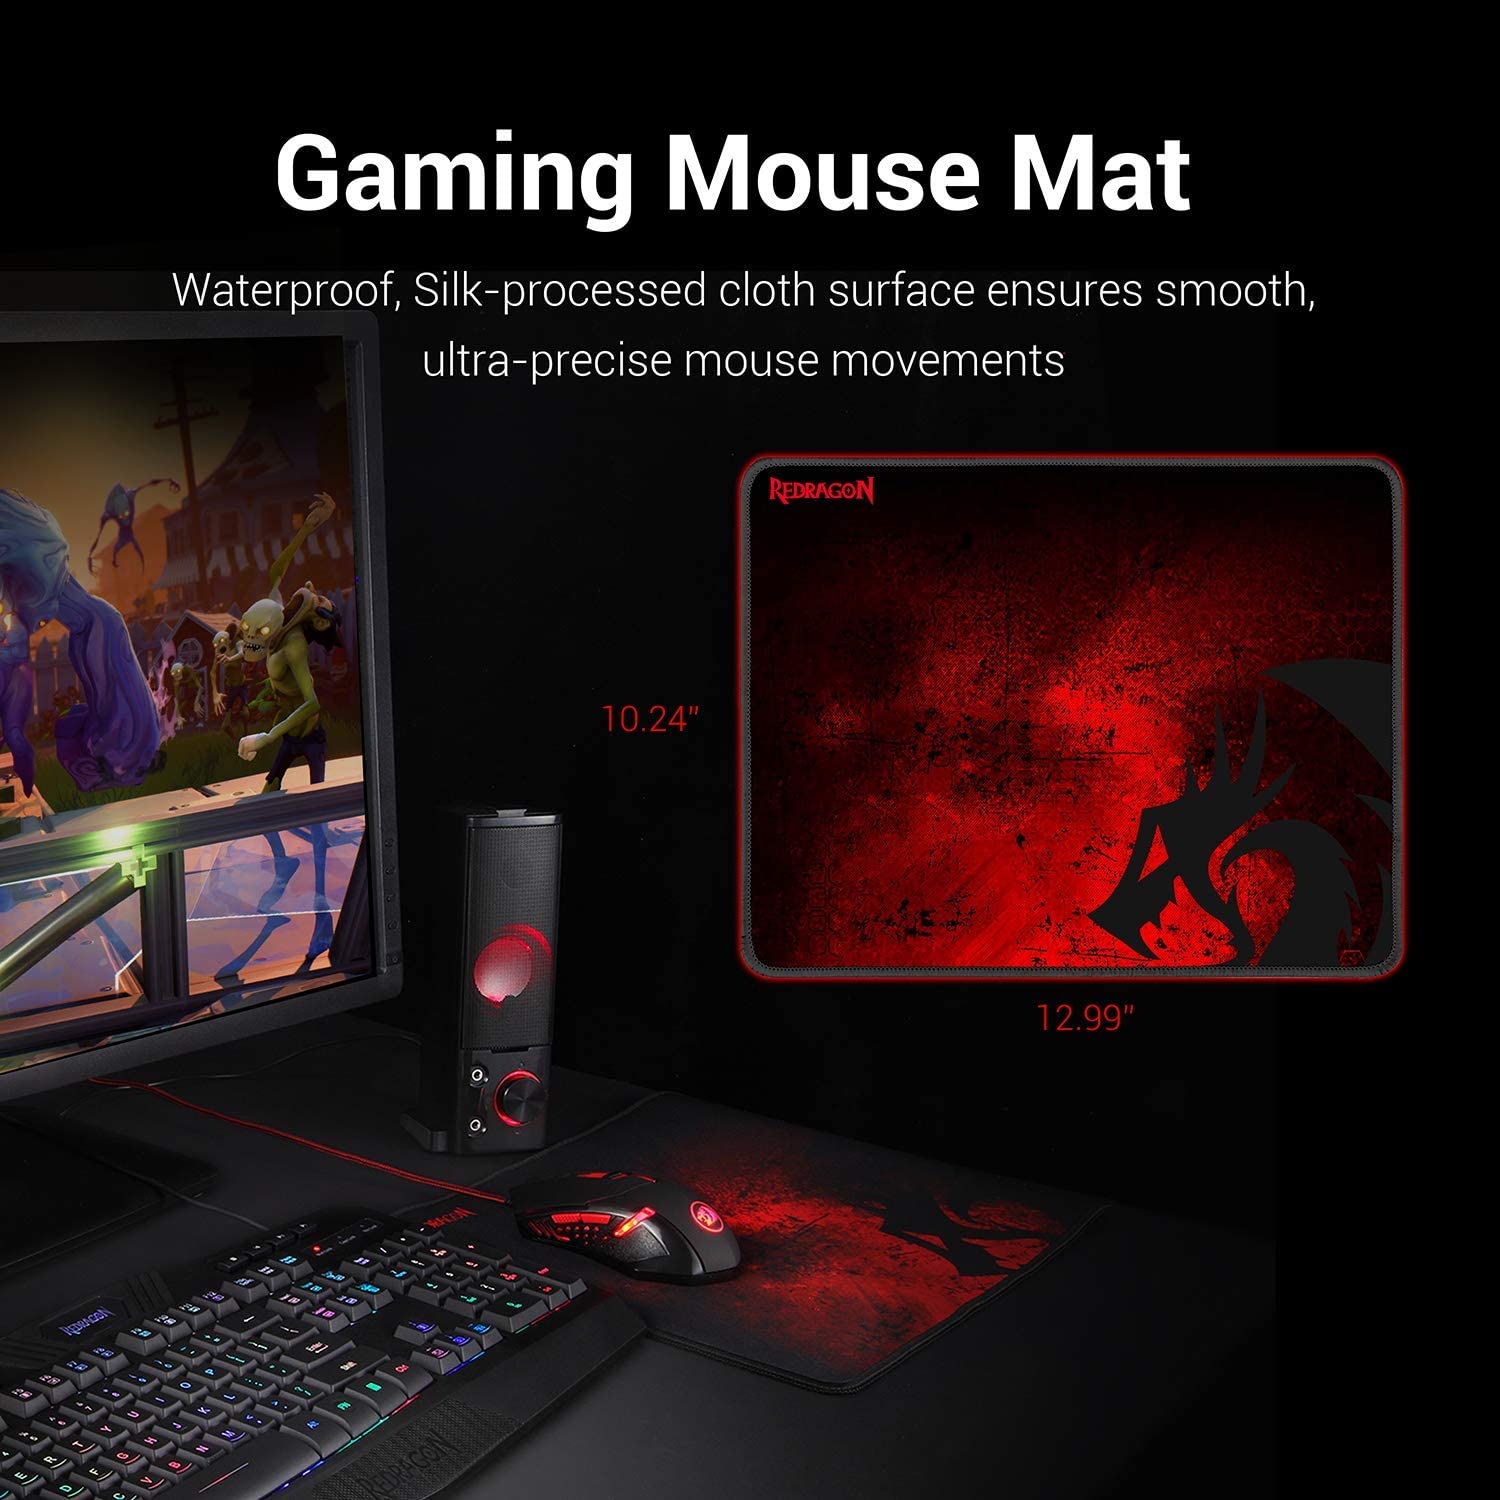 Redragon S101 PC Gaming Keyboard and Mouse Combo, Mousepad, Headset with Mic